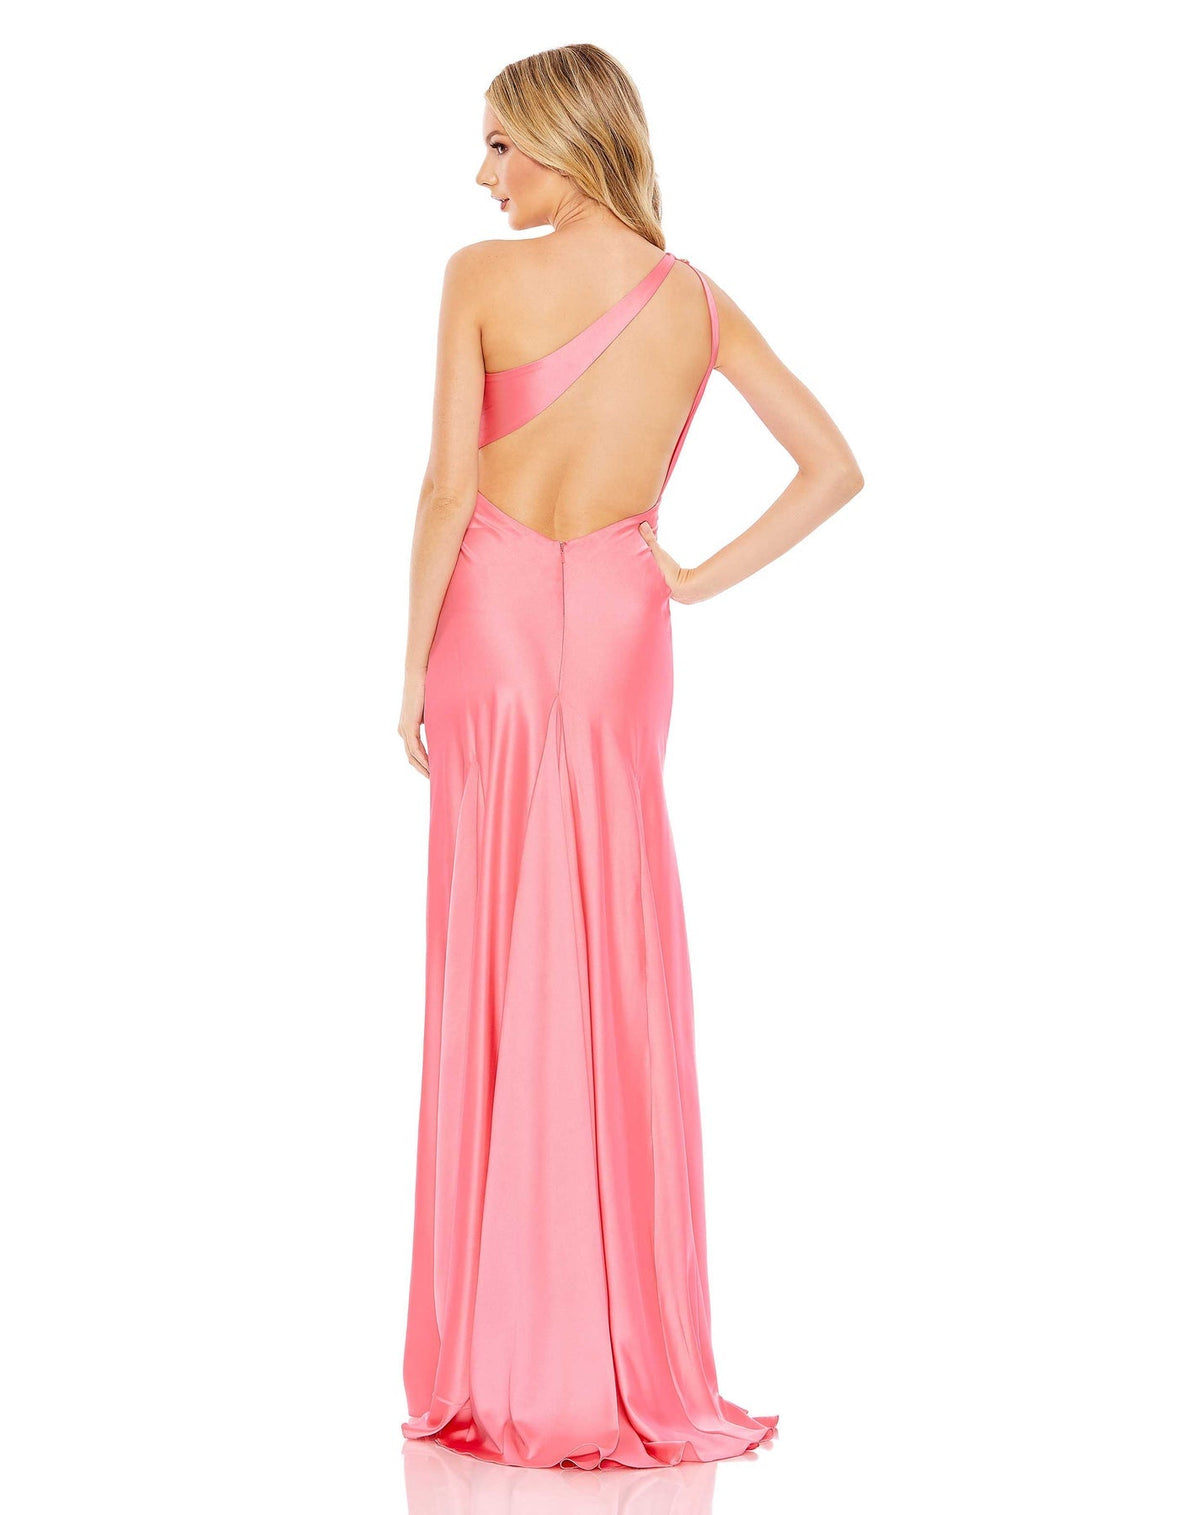 Mac Duggal, Beaded asymmetric one shoulder Grecian column gown - Sage | ShaideBoutique.com UK coral pink back viewMac Duggal, Beaded asymmetric one shoulder Grecian column gown - Pink | ShaideBoutique.com UK back view